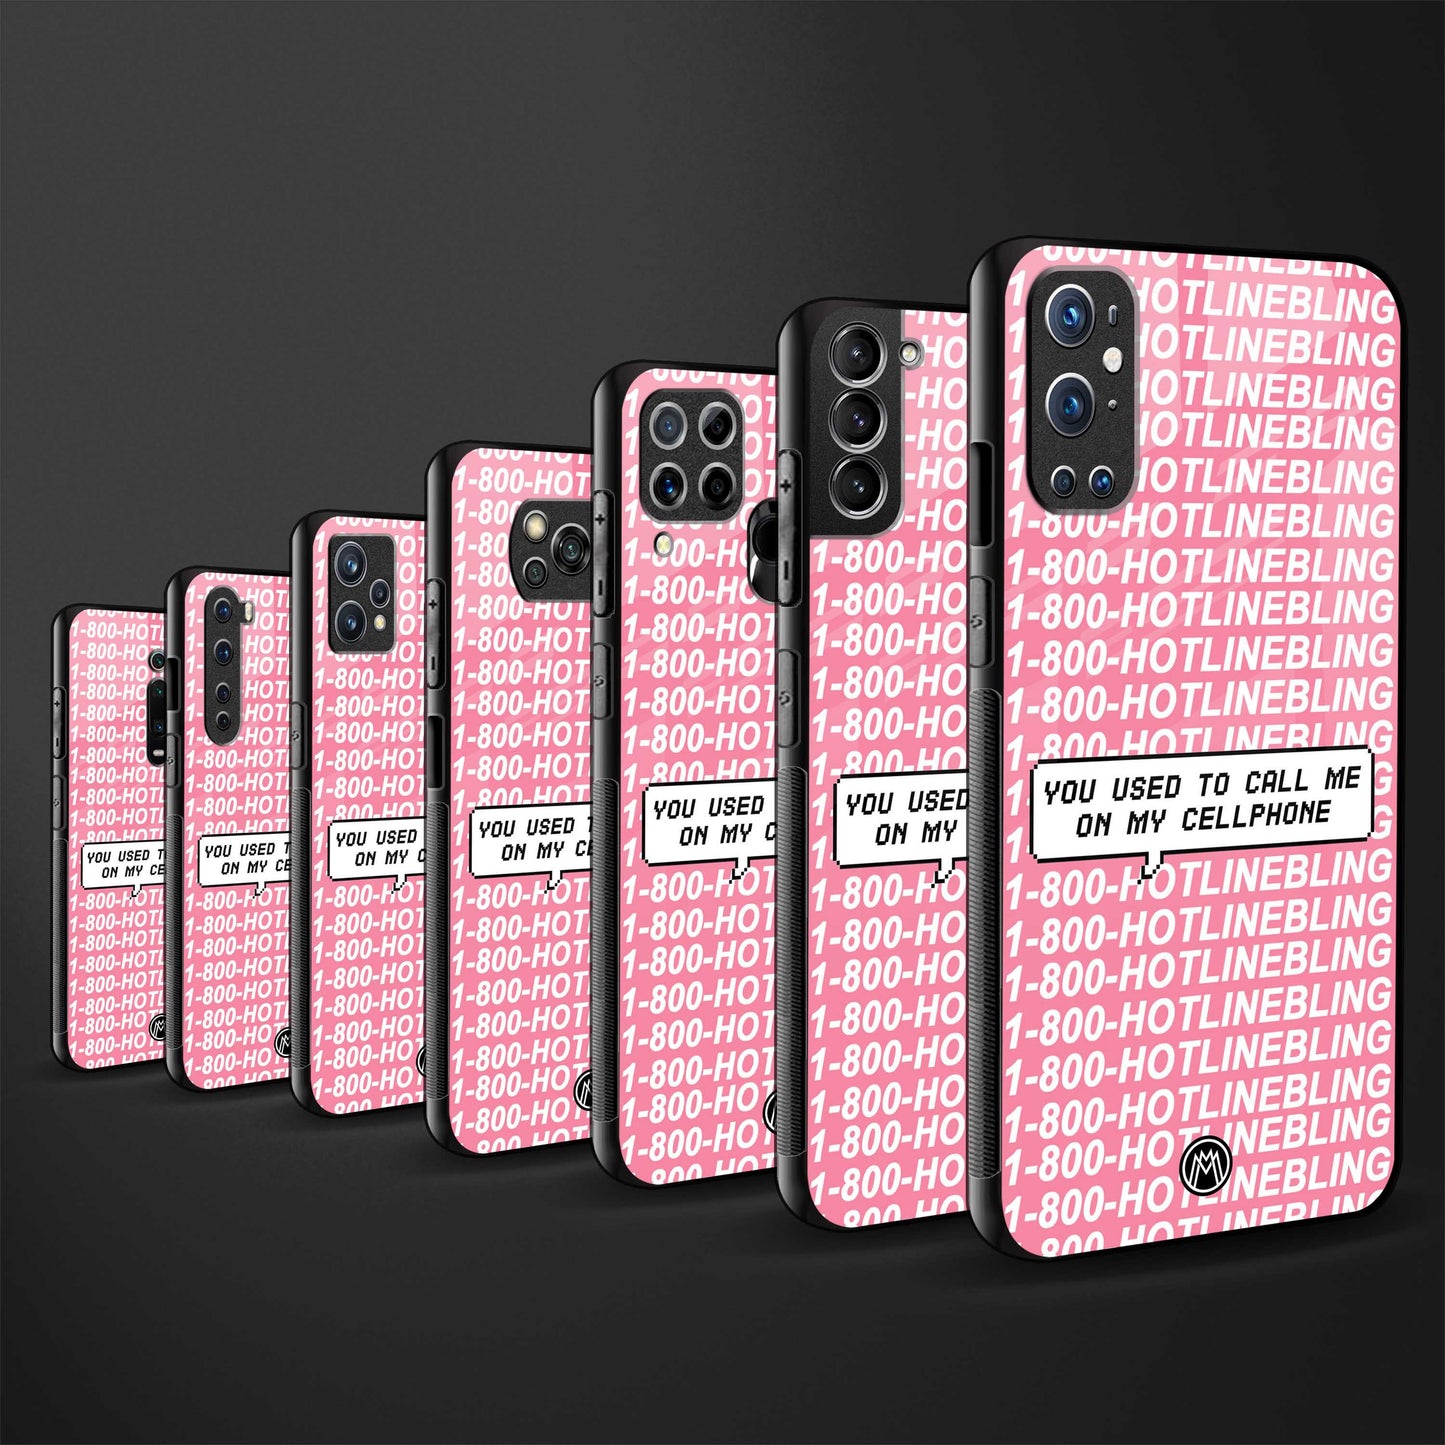 1800 hotline bling phone cover for samsung galaxy m30s 